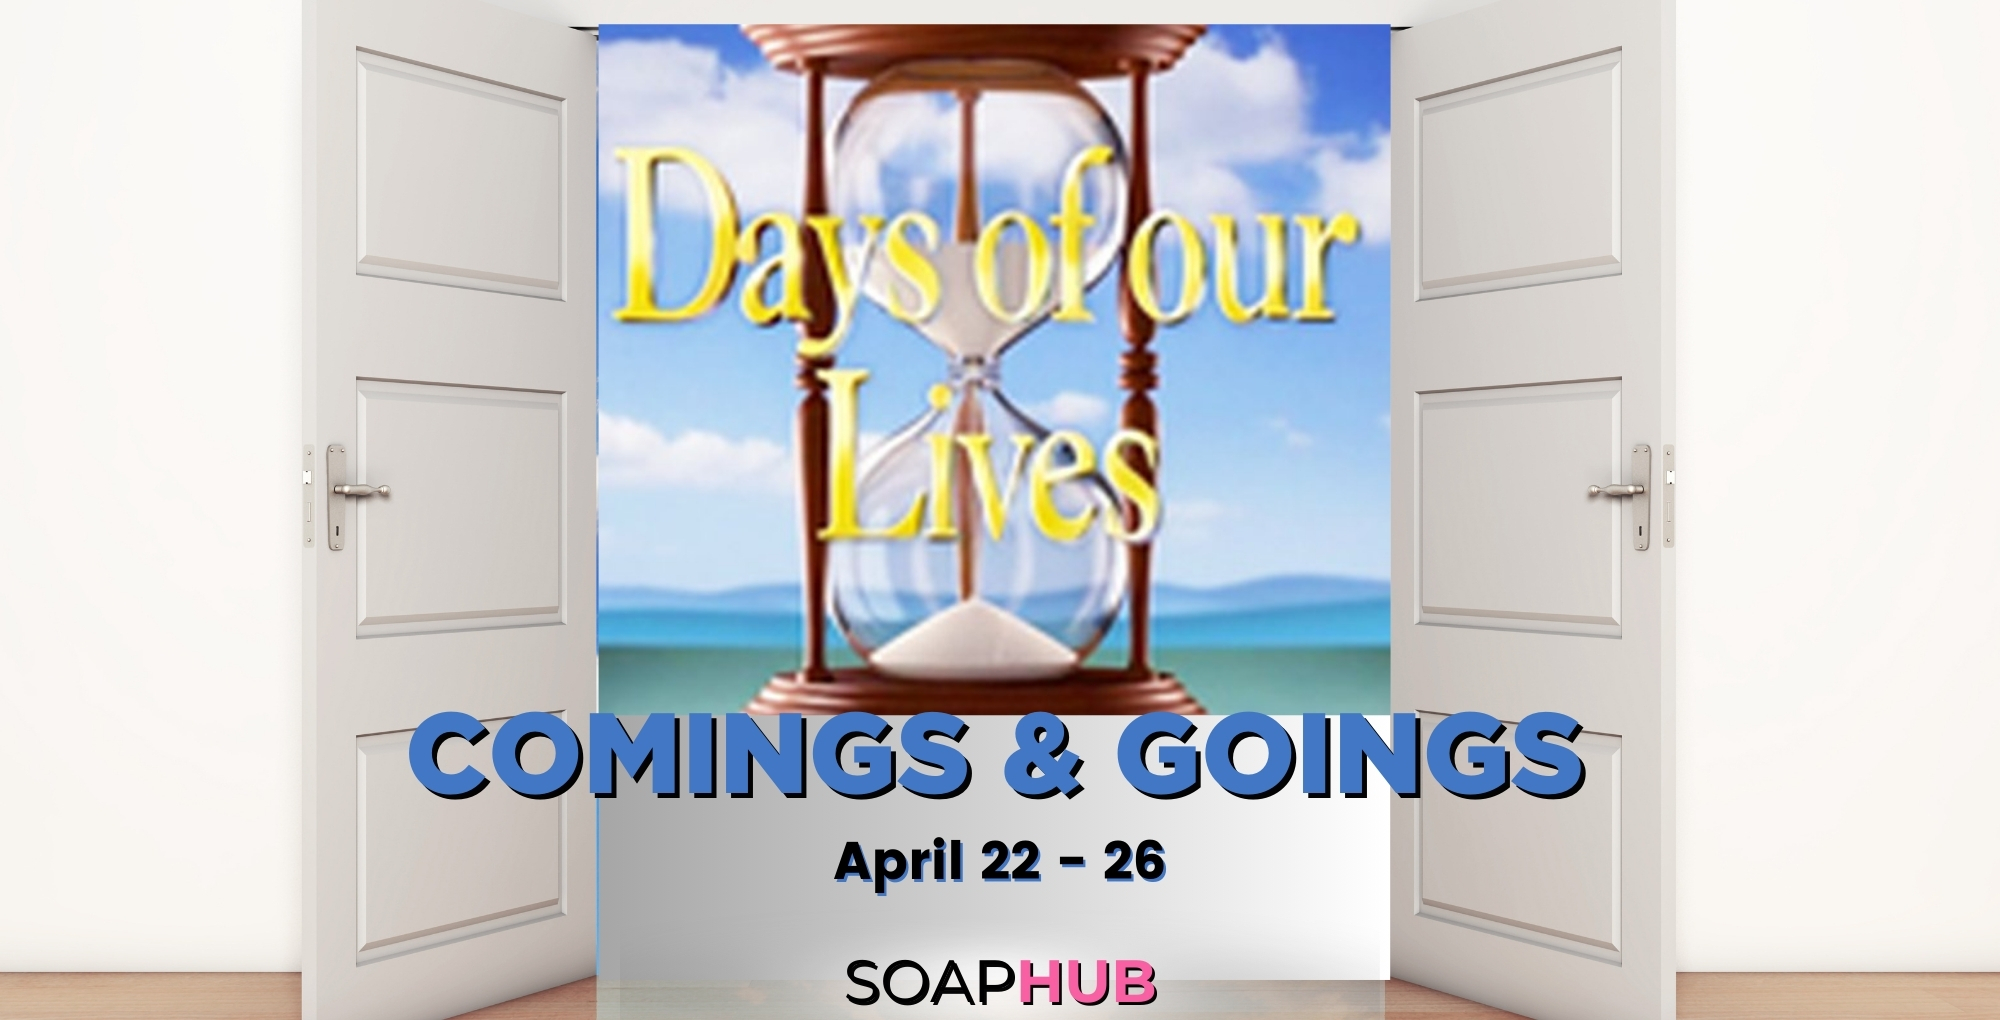 Days of our Lives comings and goings for April 22-26 with the Soap Hug logo across the bottom.